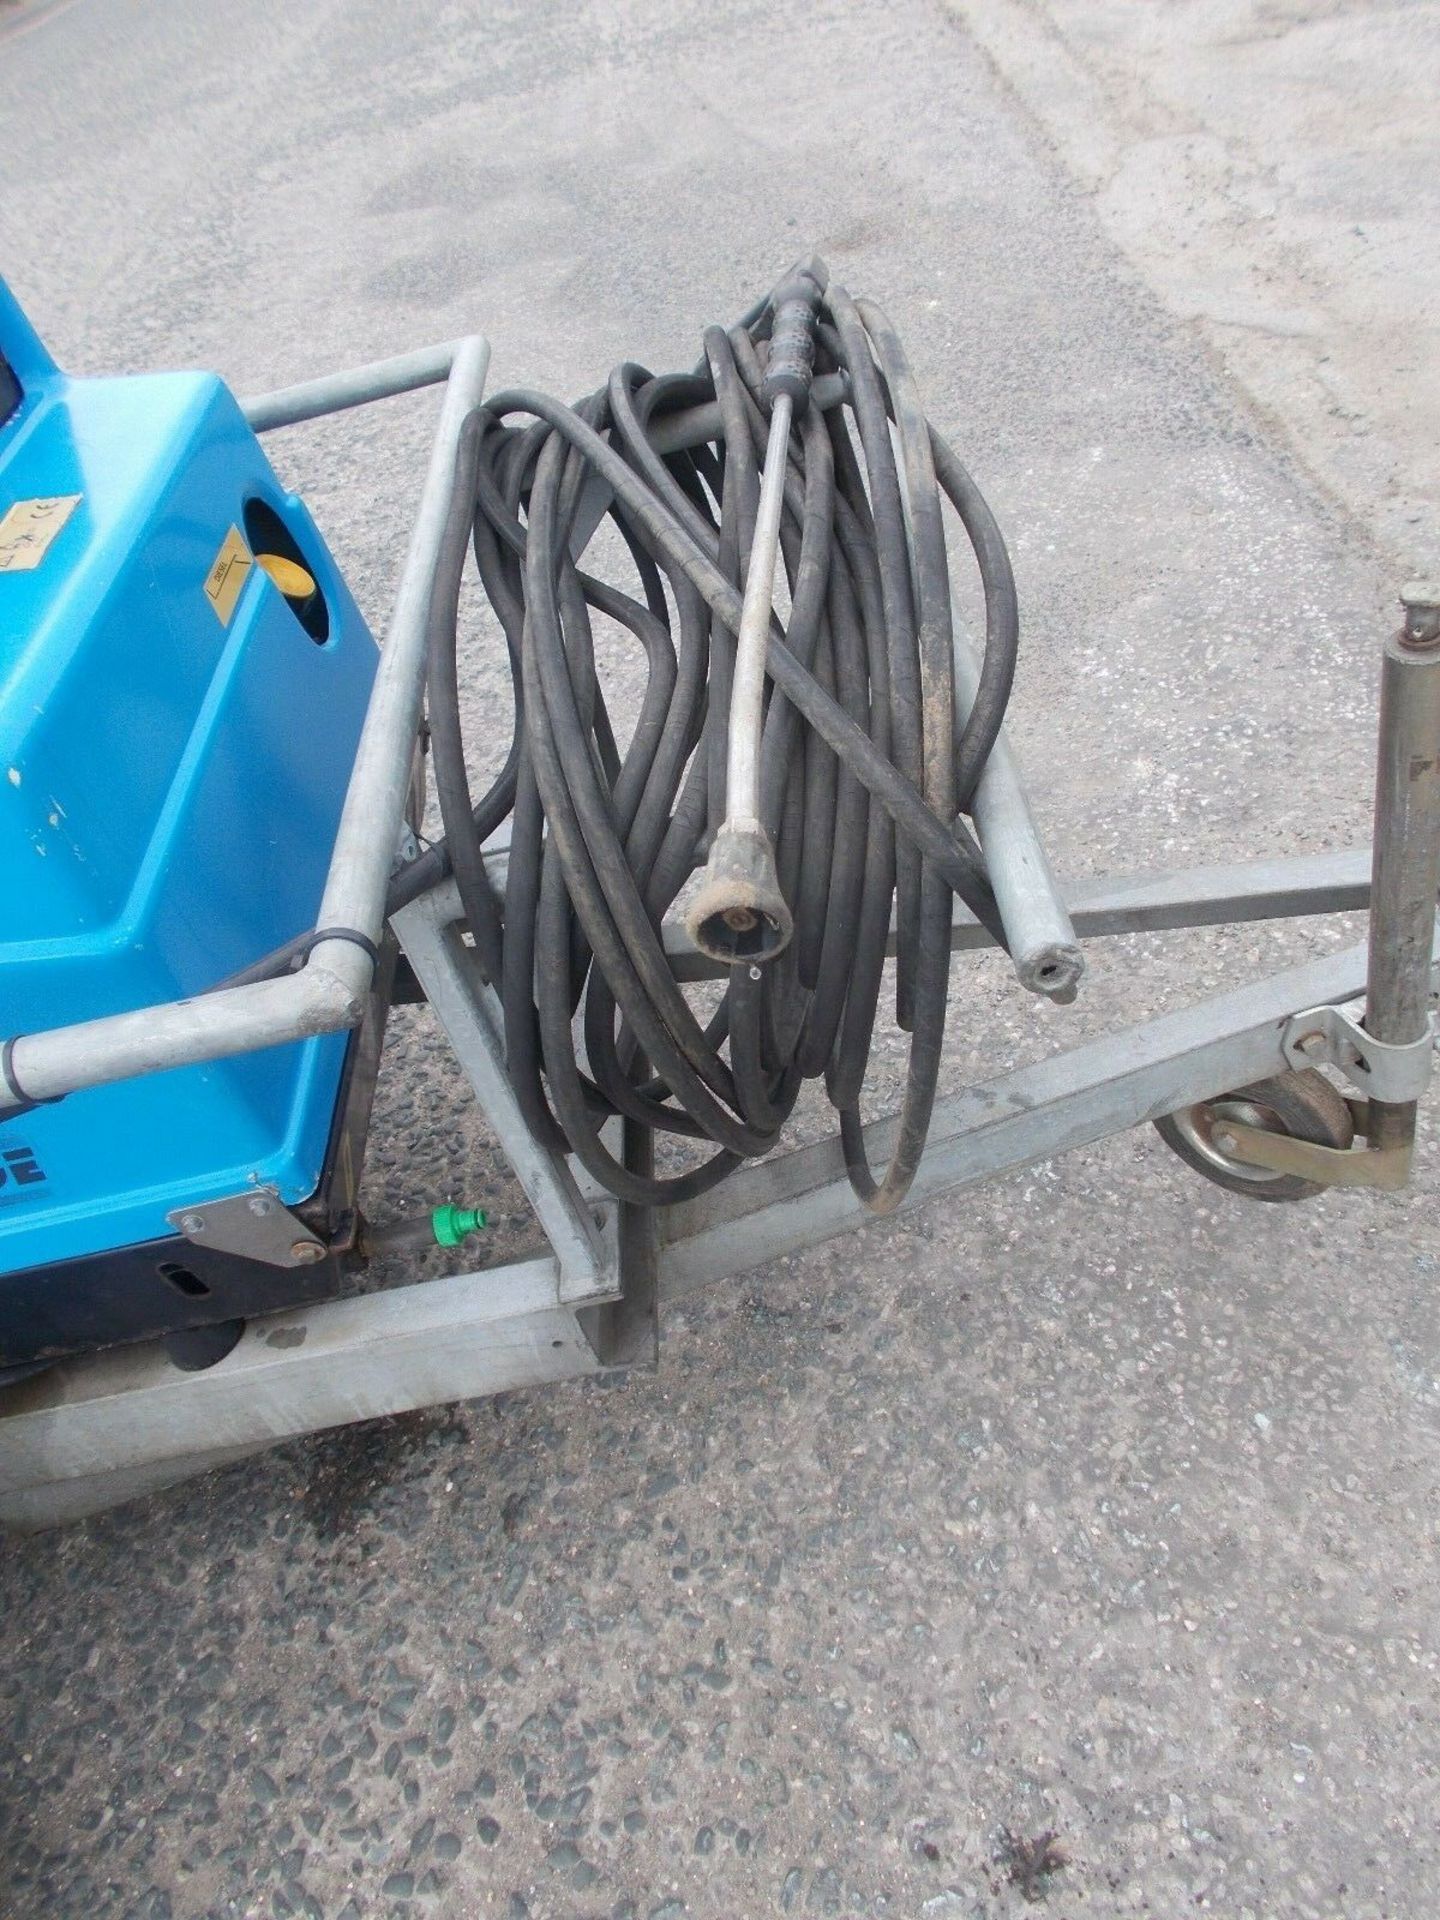 Edge V 200 MD Towable Hot and Cold Diesel Engined Pressure Washer - Image 5 of 7